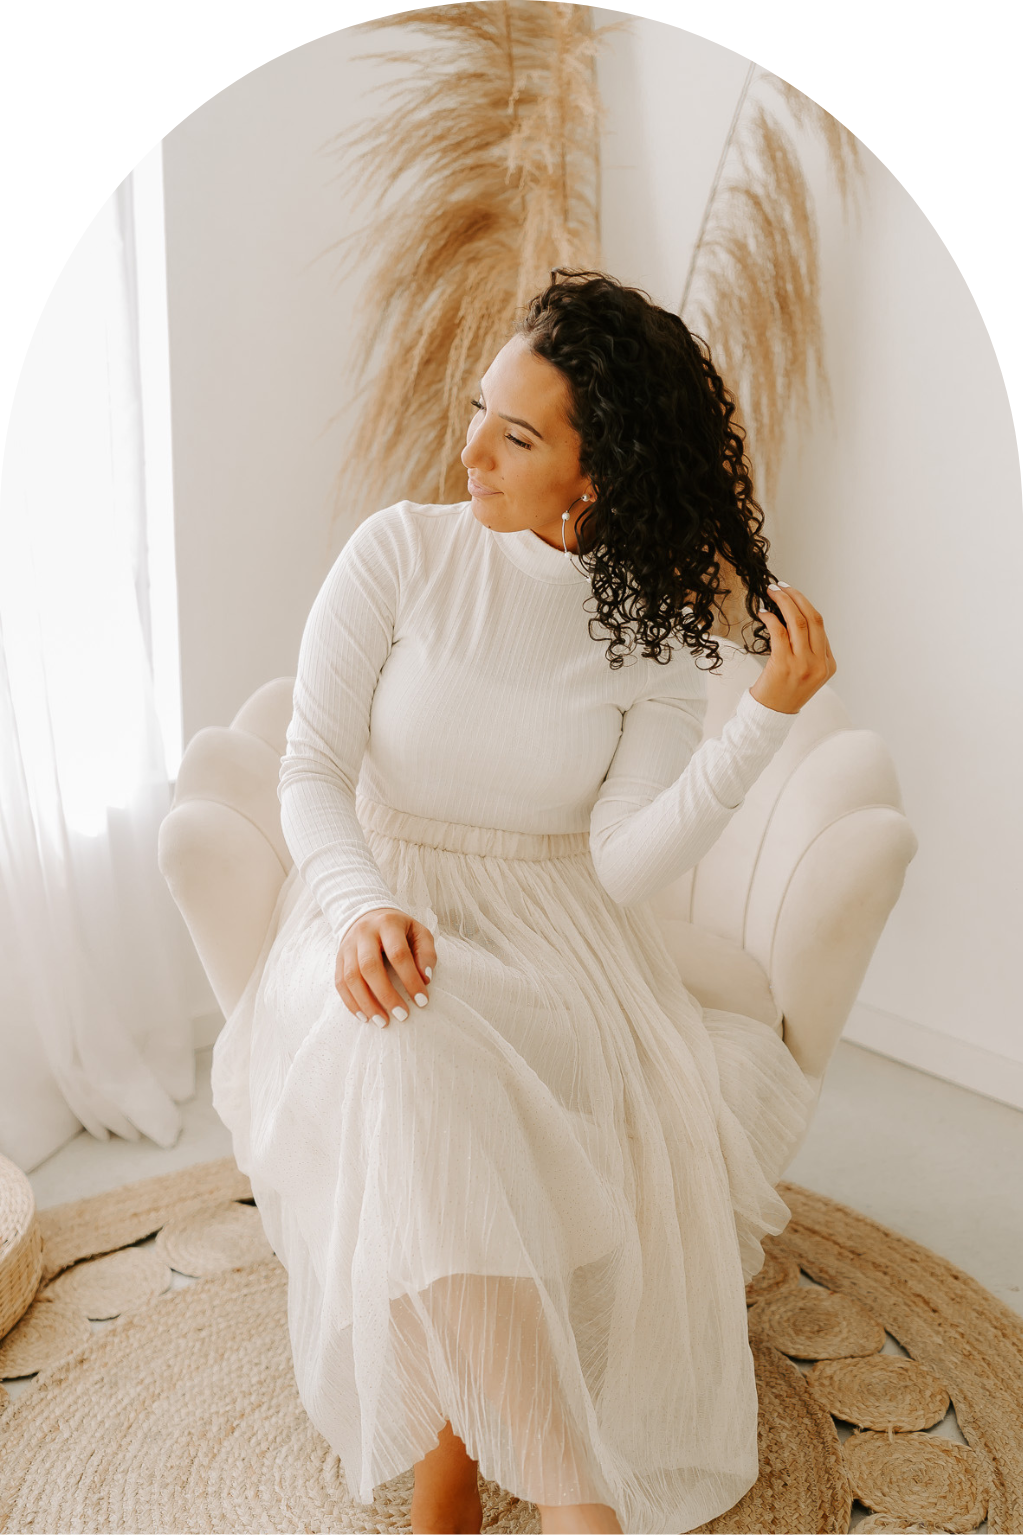 A photo of Edmonton photographer Shayna Fearn Photography, sitting elegantly on a white chair, in a long white dress, playing with her dark curly hair.